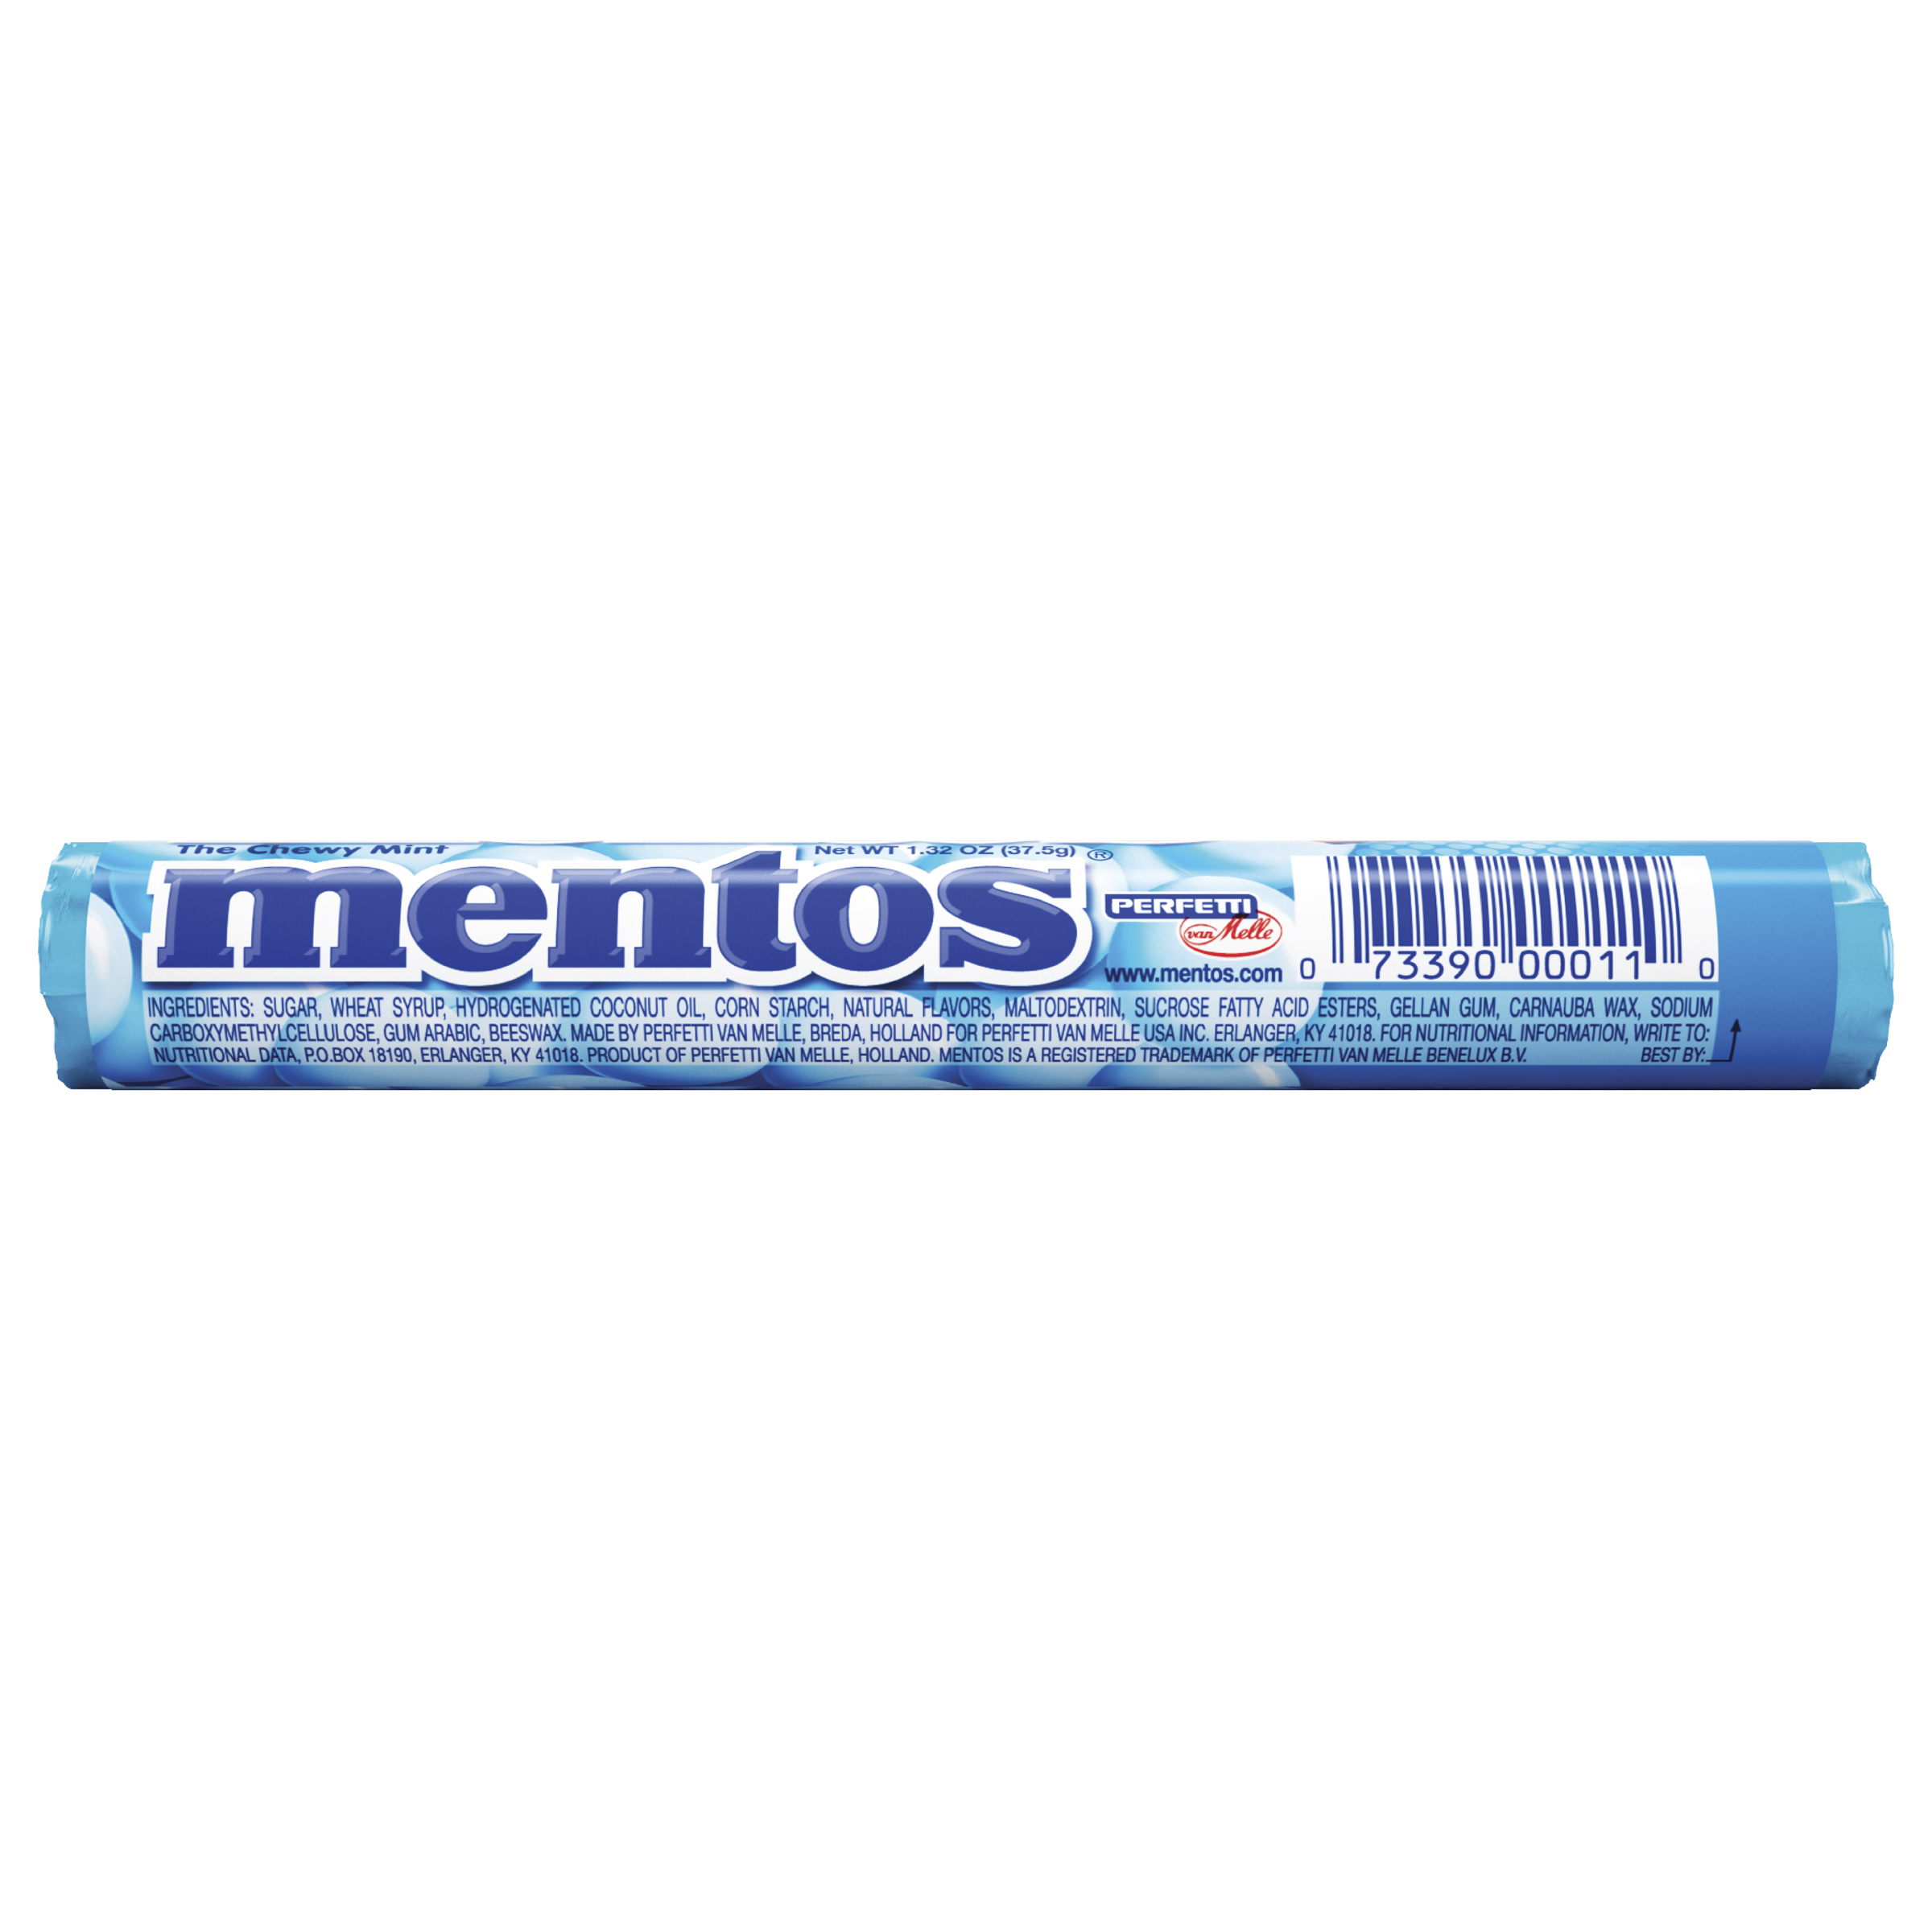 Mentos Chewy Mint Candy Roll, Fresh Mint Flavor, Peanut and Tree Nut Free, Regular Size, 1.32 oz - image 3 of 7